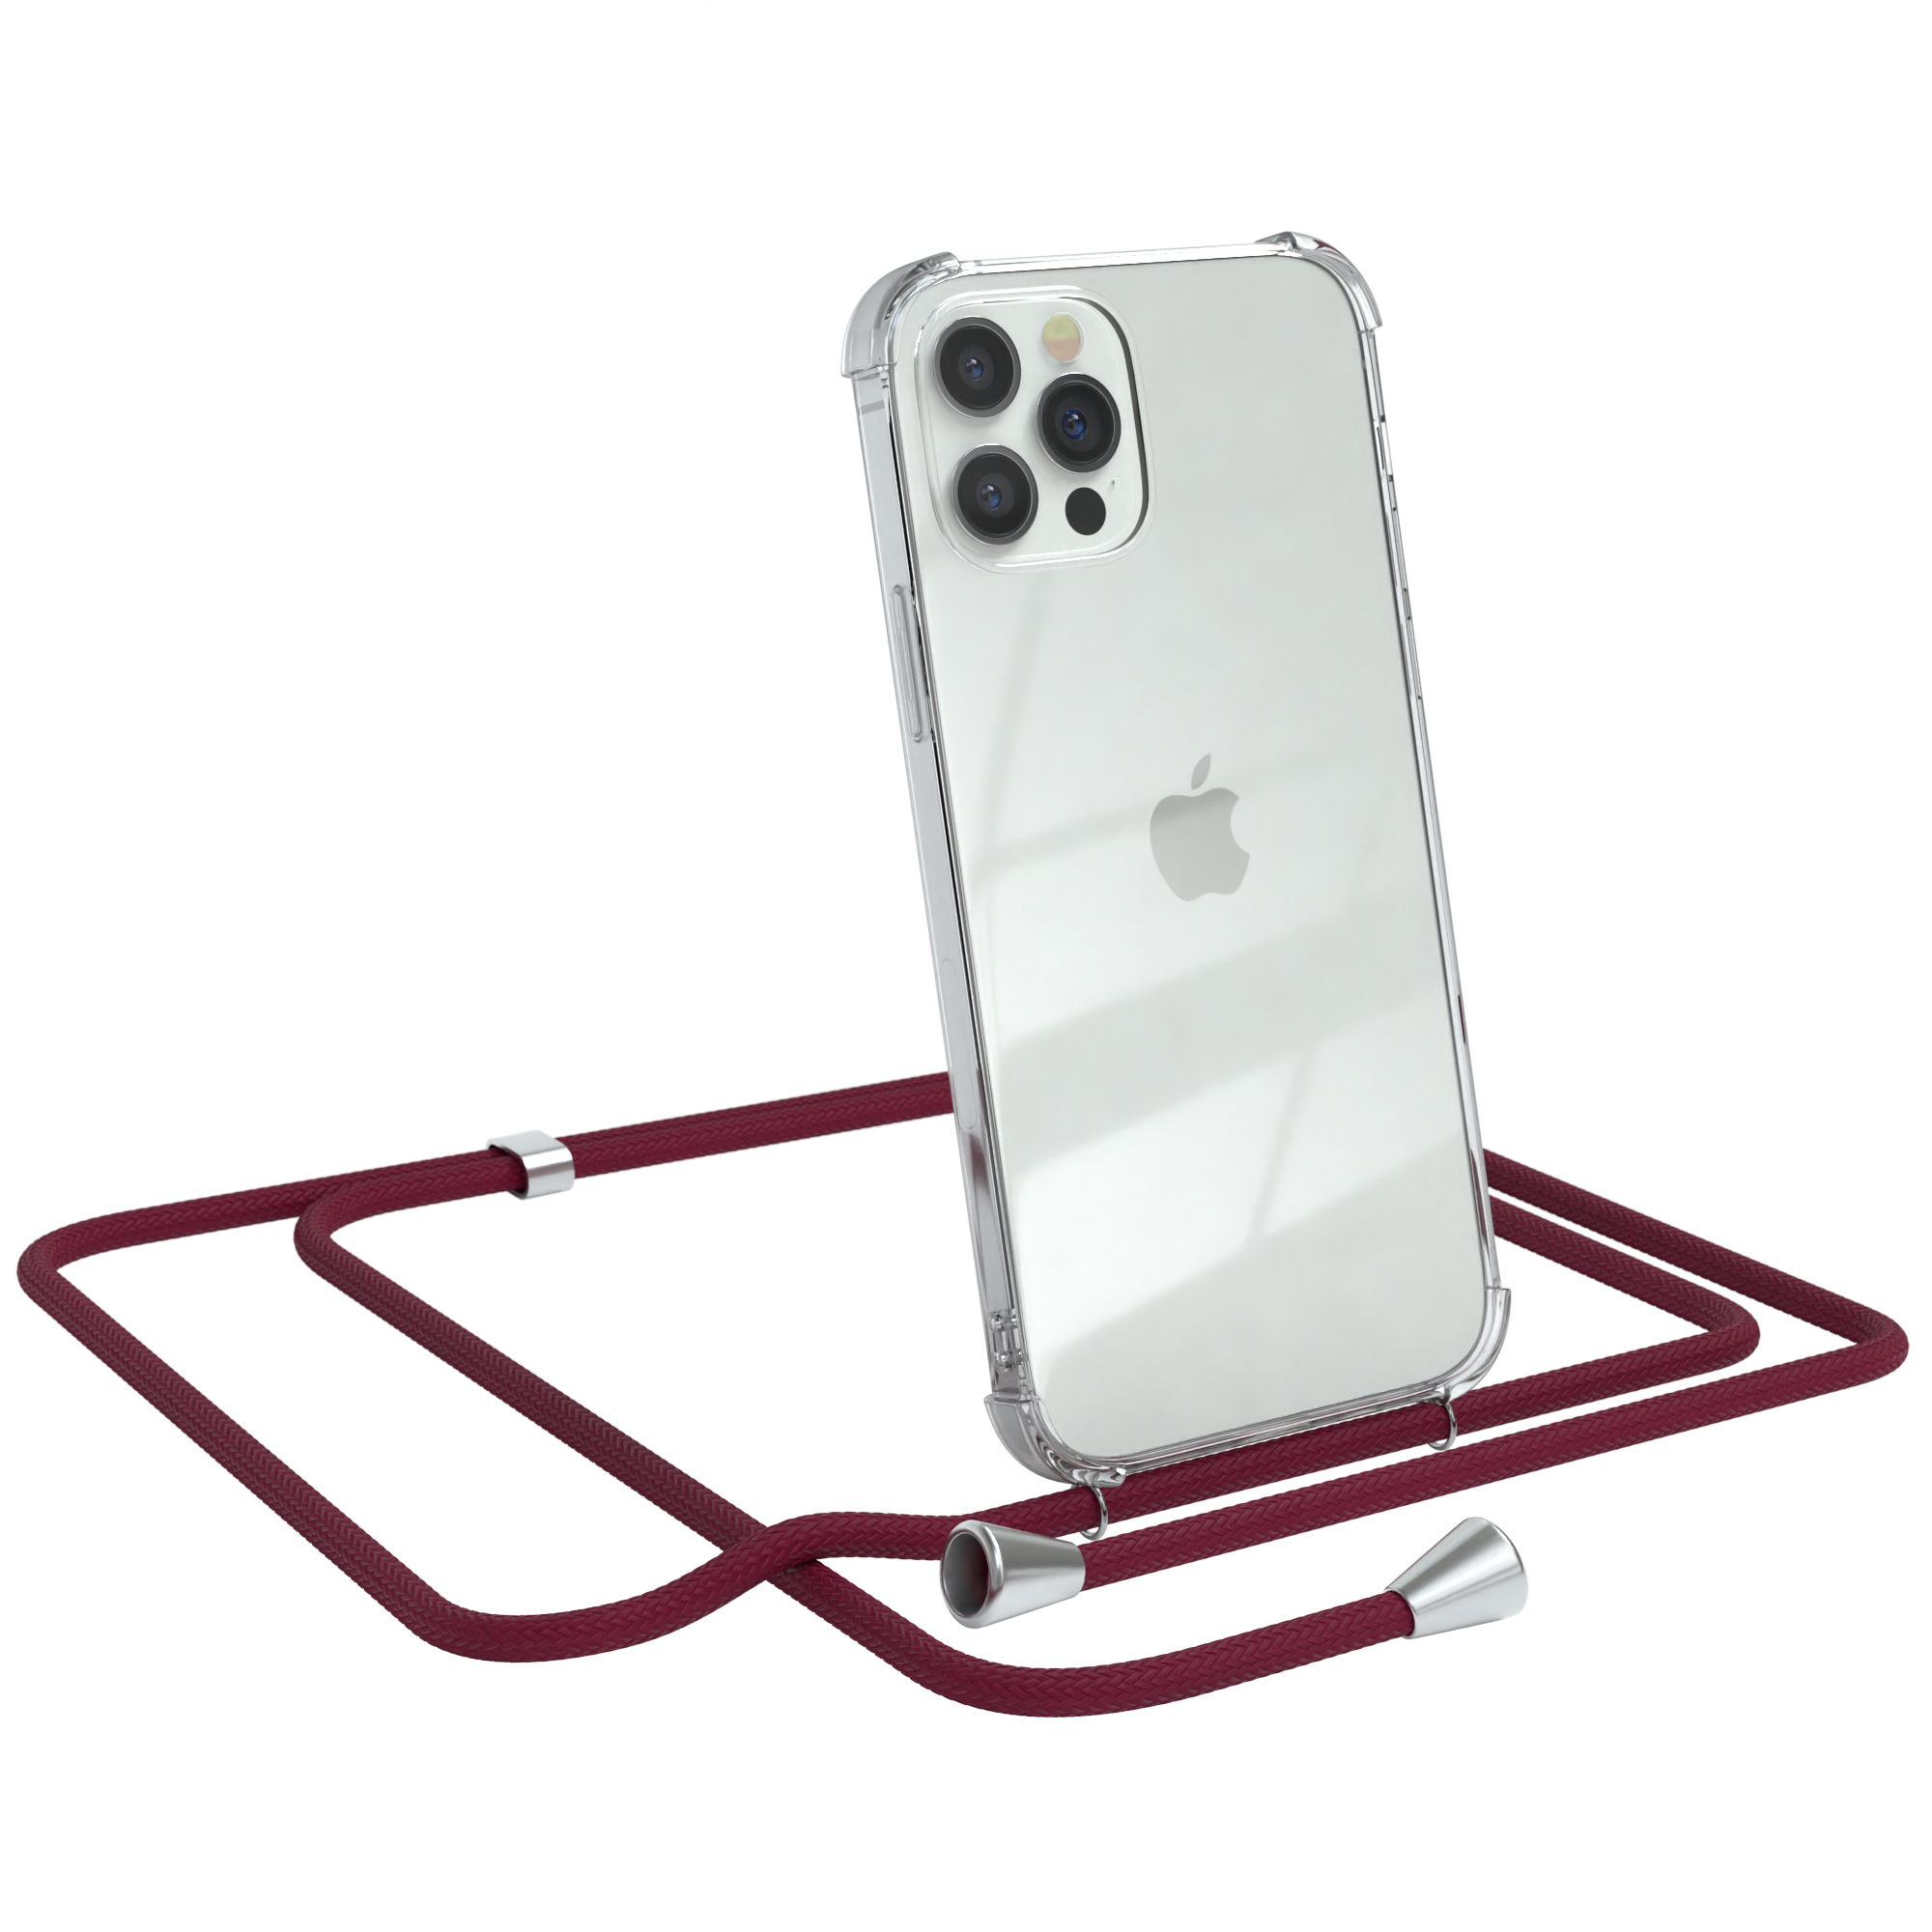 EAZY CASE Clear Cover mit Bordeaux 12 Apple, / Silber Clips / iPhone Umhängeband, Umhängetasche, 12 Rot Pro